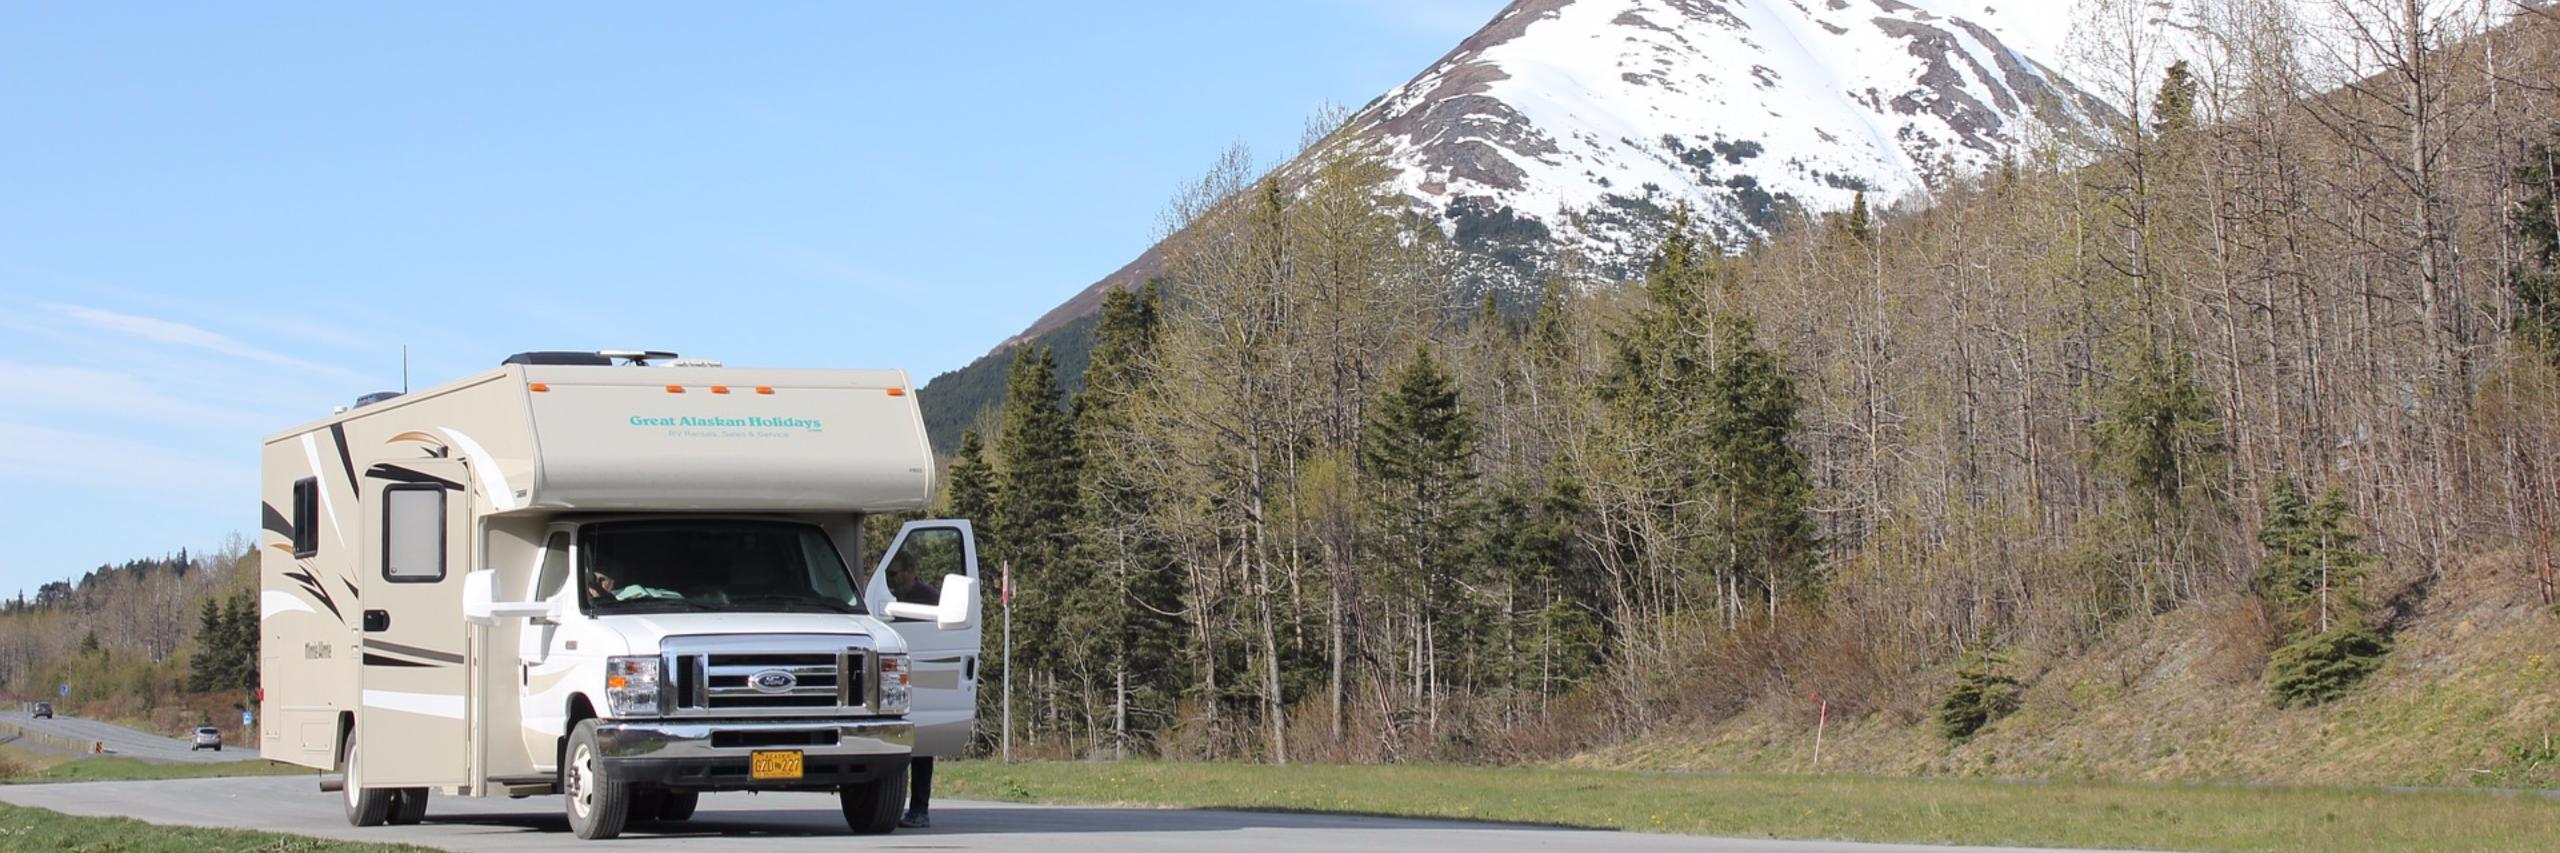 RV camper parked beside mountain